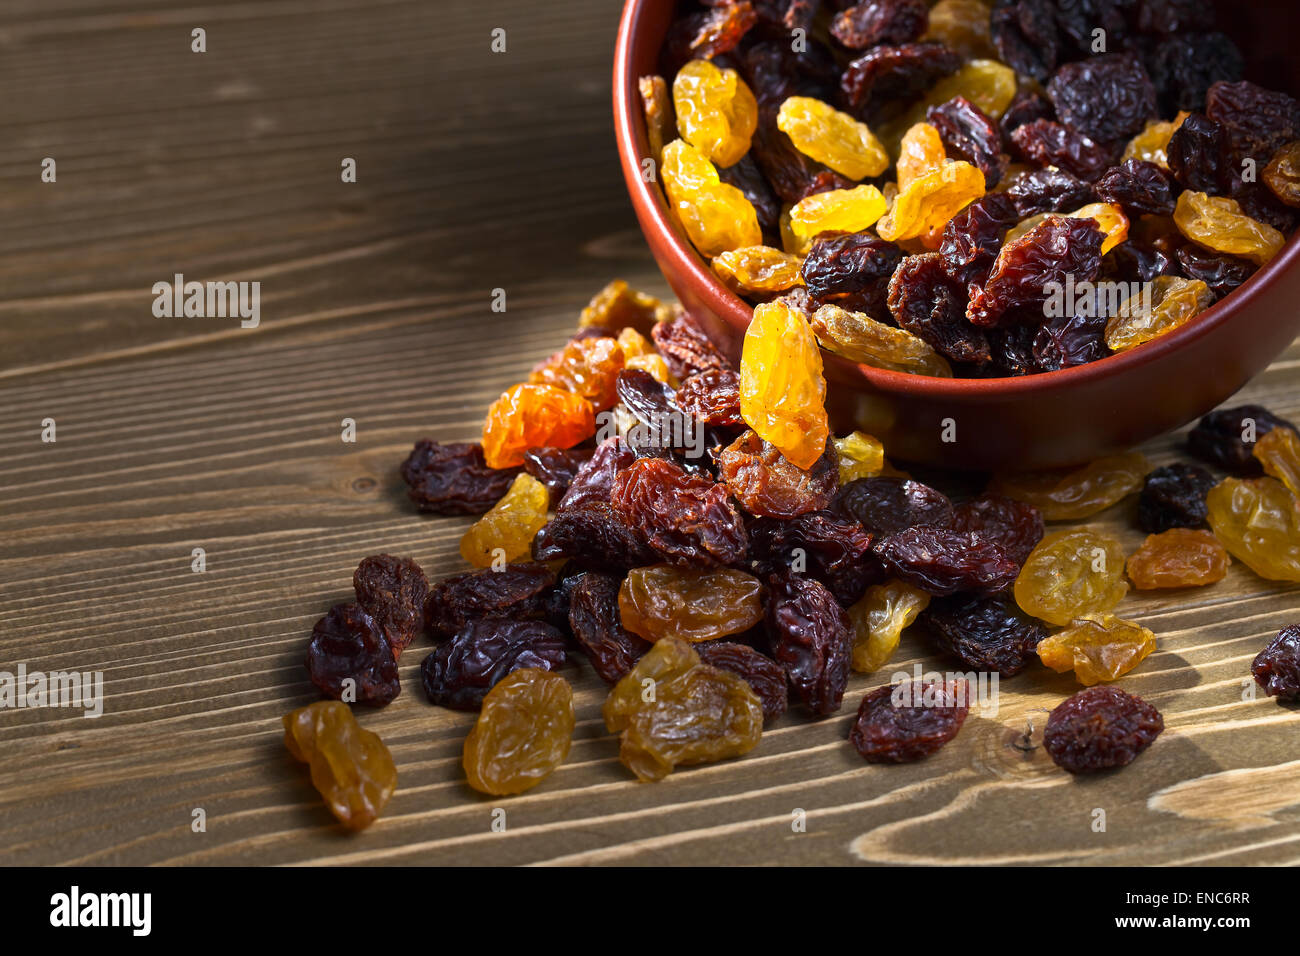 Sultana Ingredient High Resolution Stock Photography and Images - Alamy